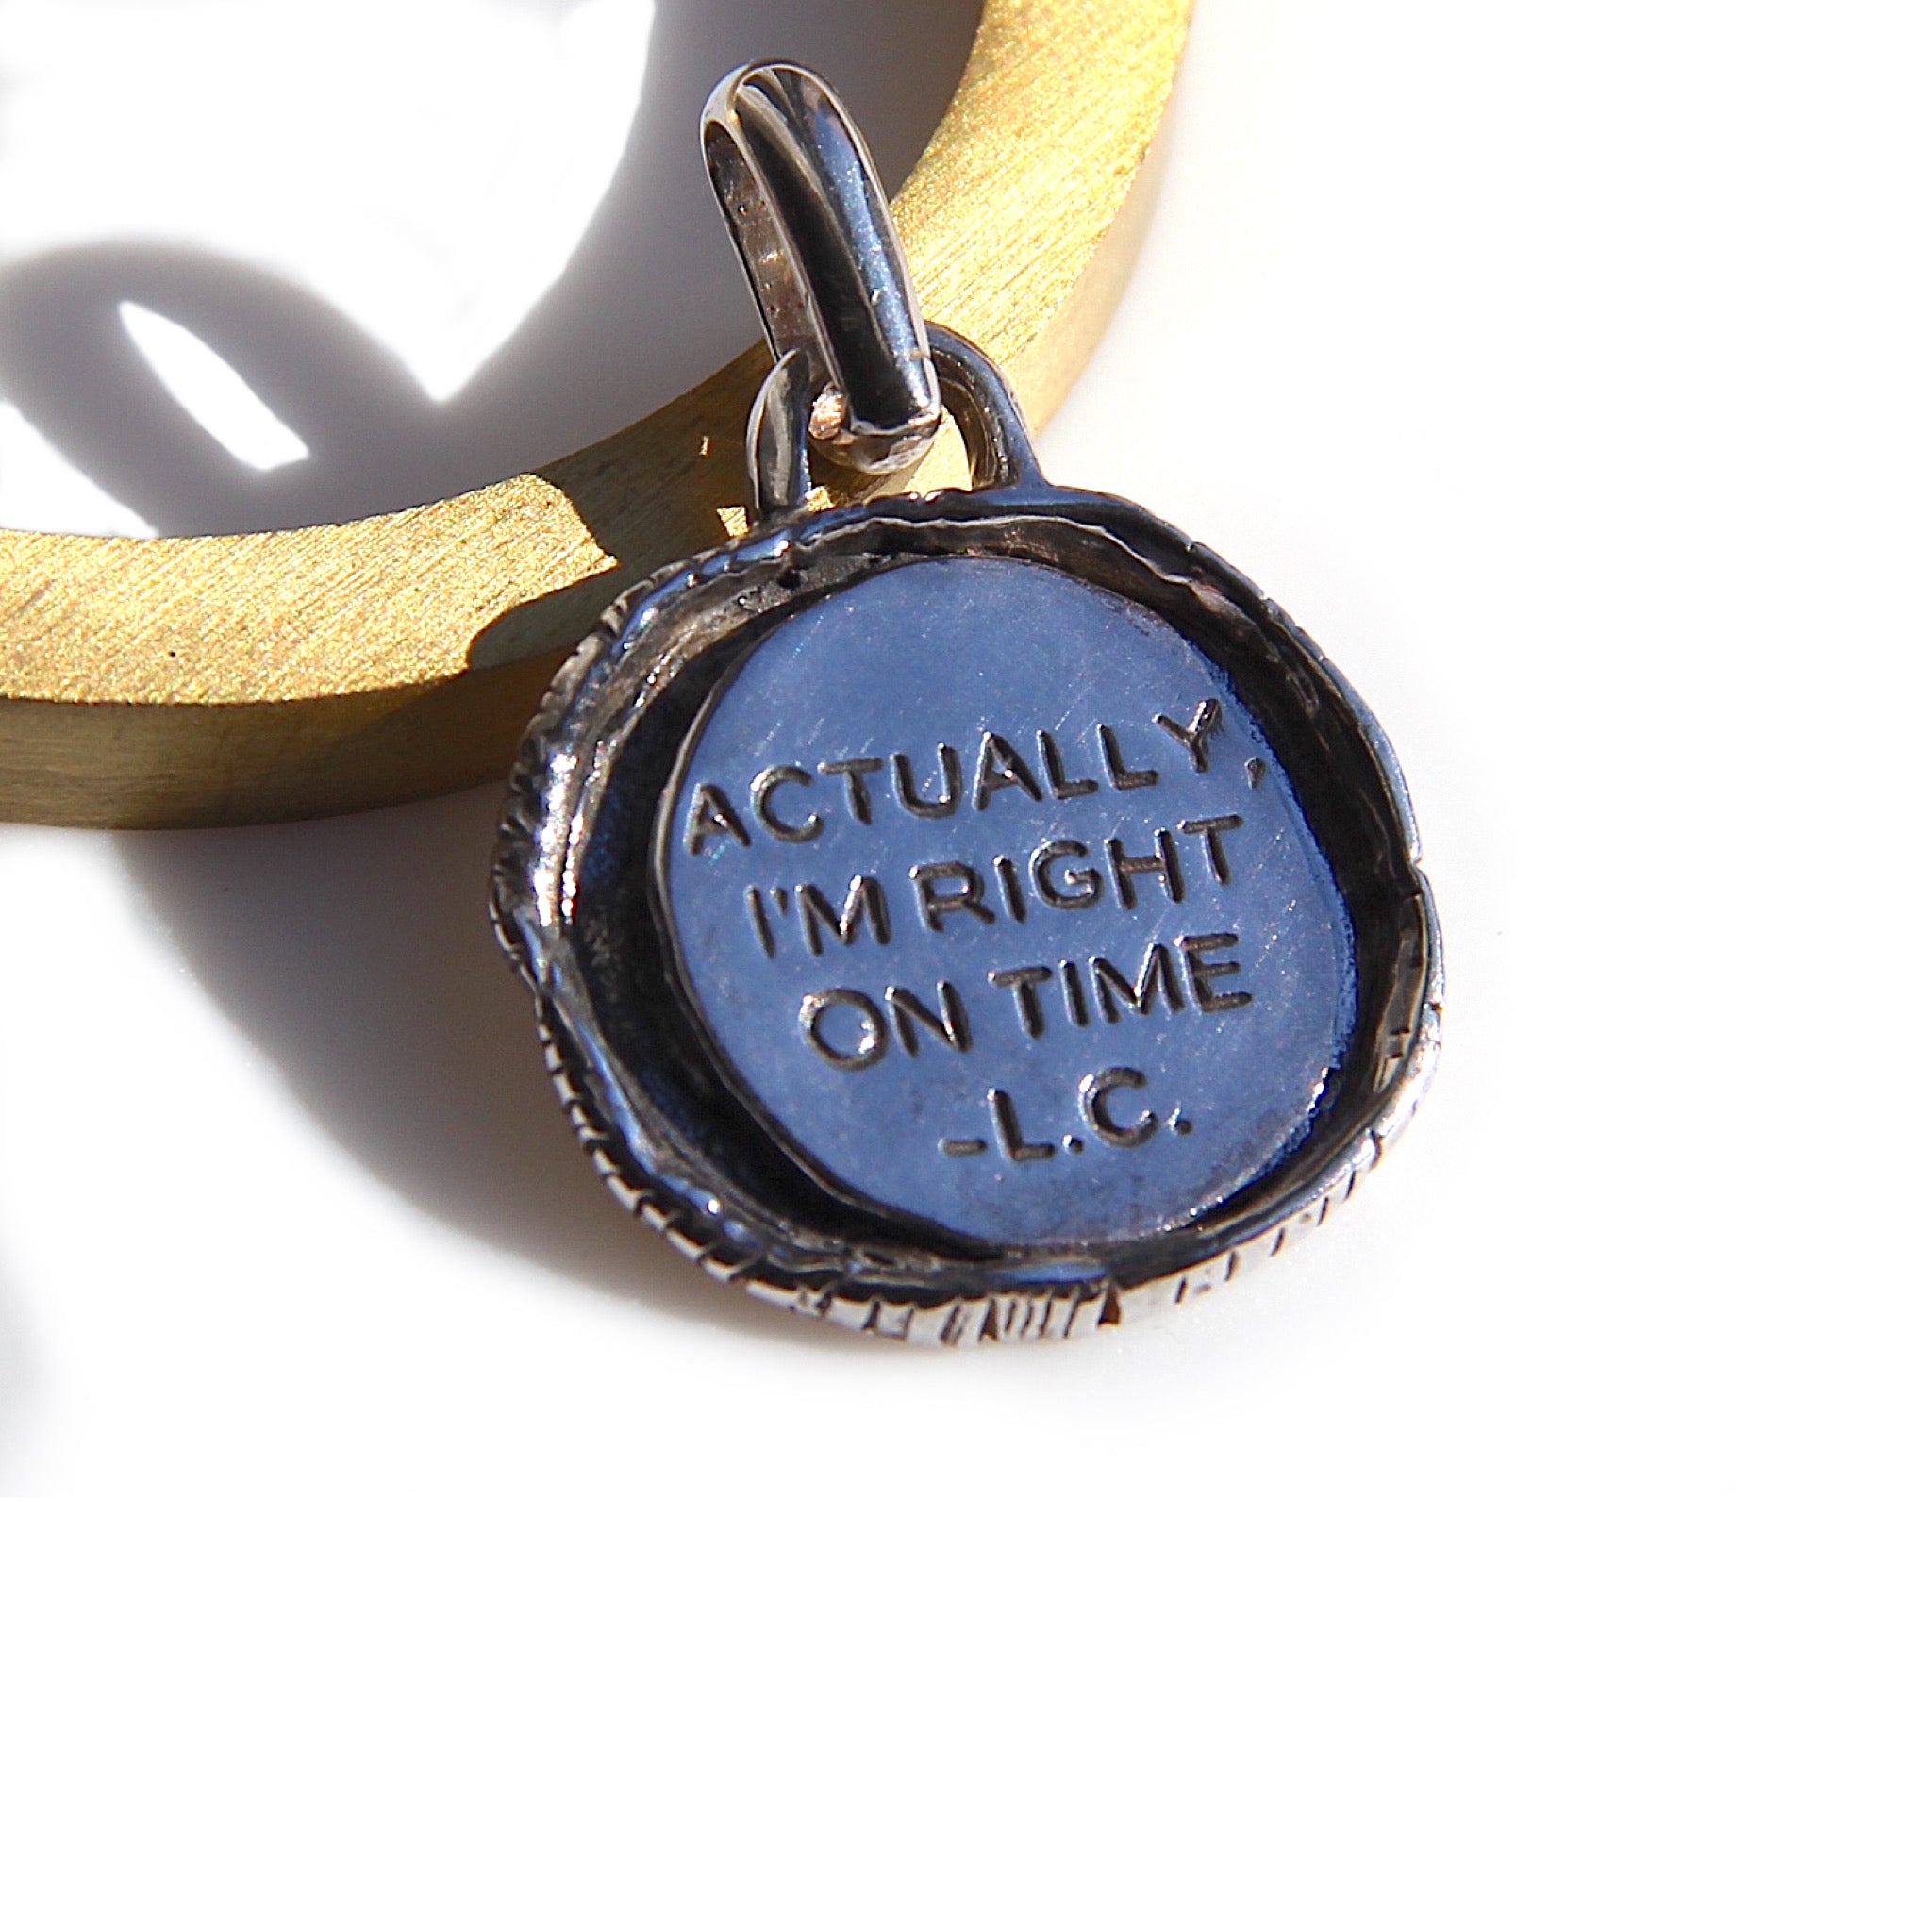 Actually, I’m right on time pendant charm